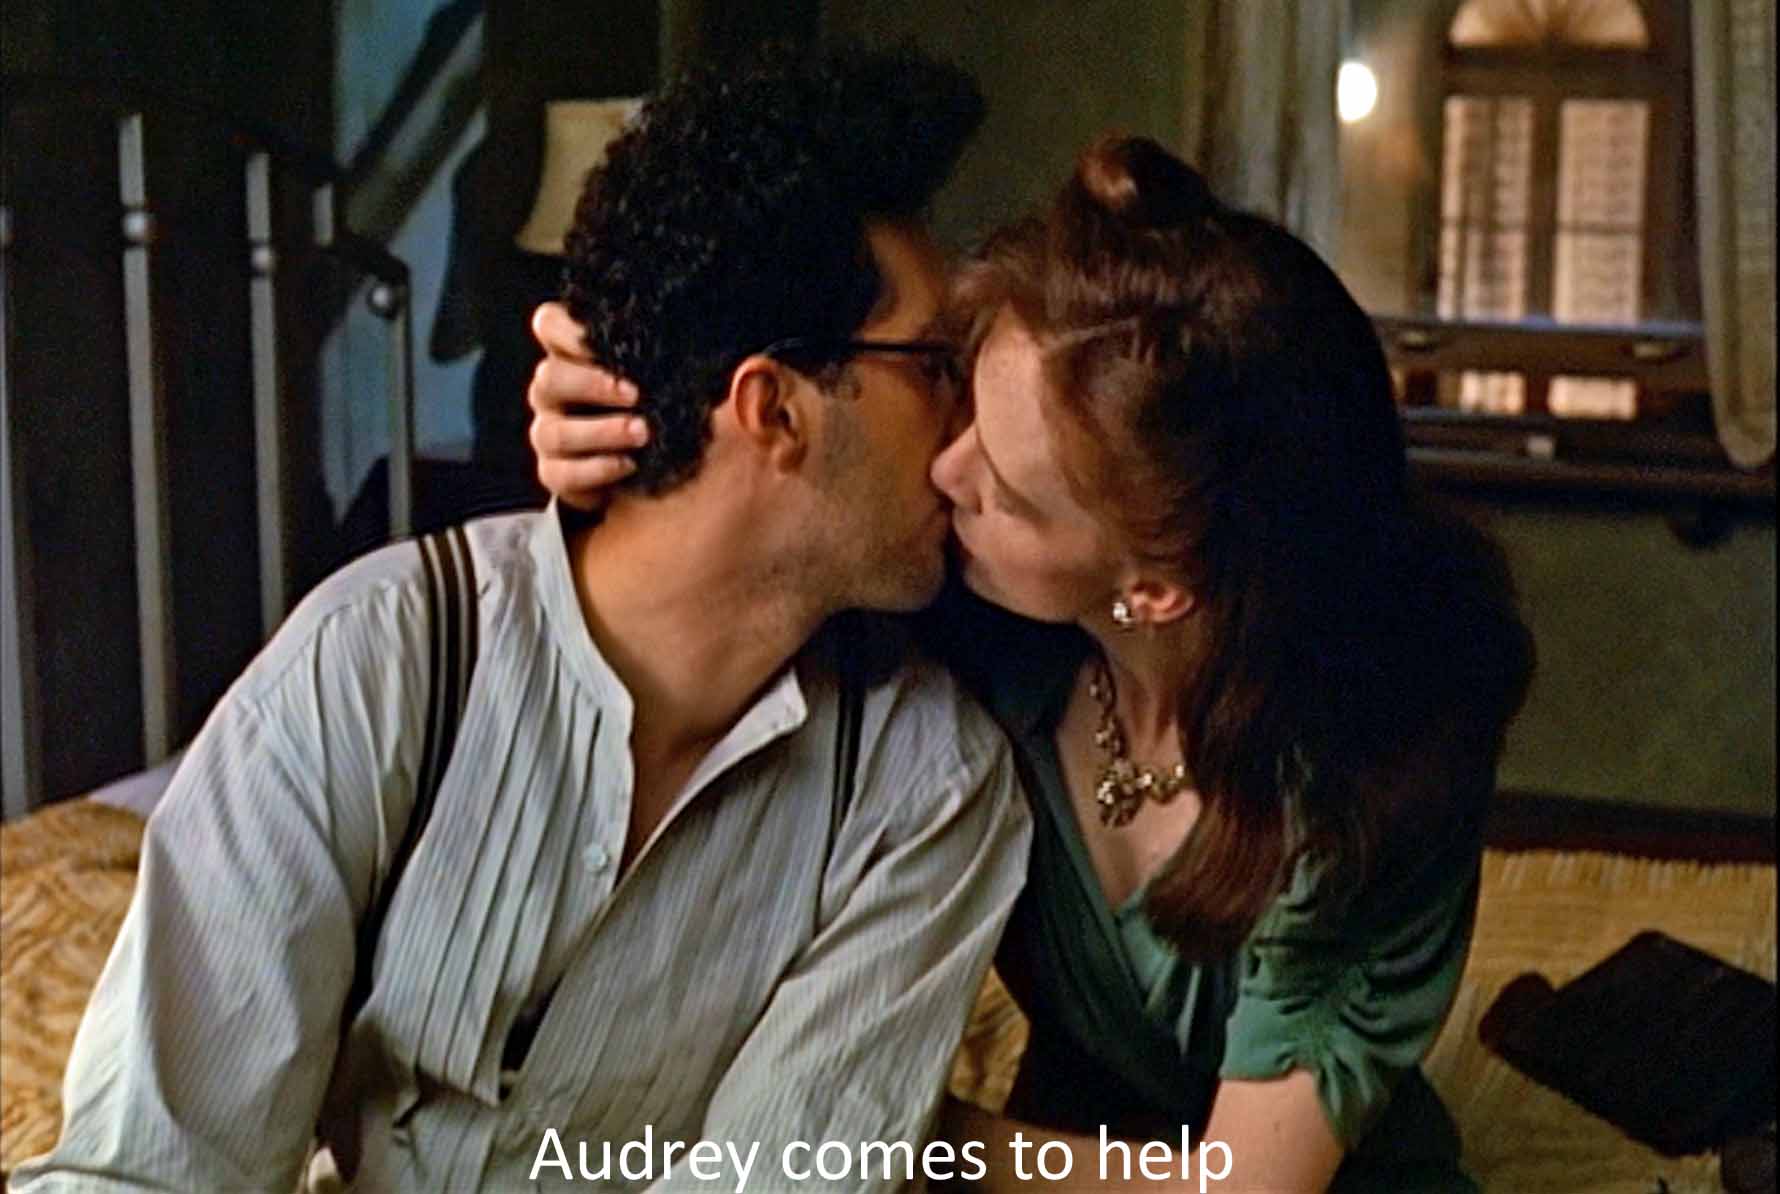 Audrey comes to help